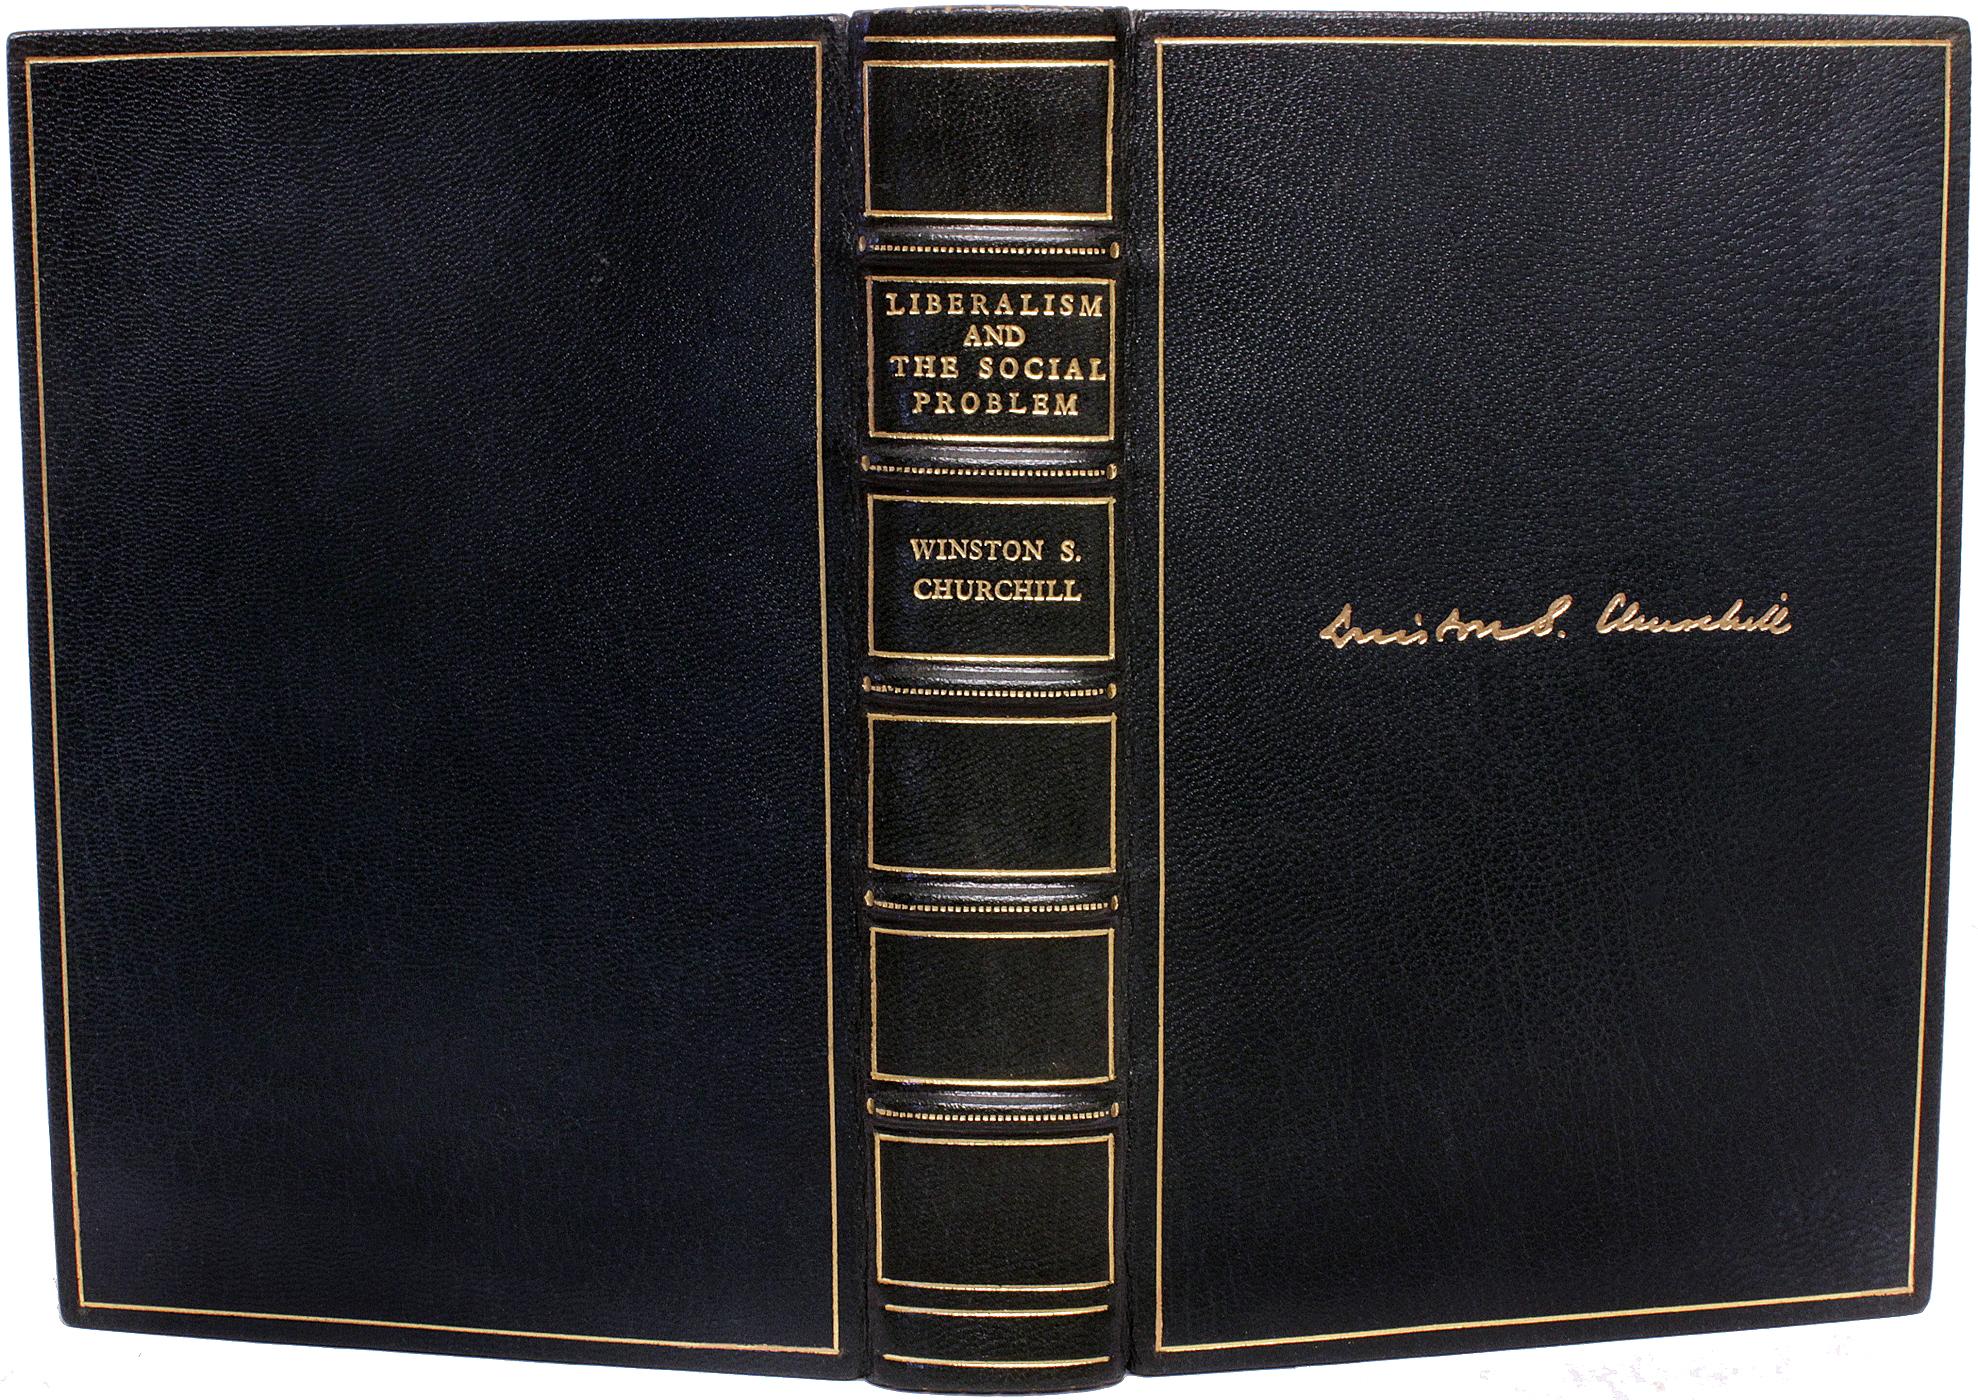 AUTHOR: CHURCHILL, Winston. 

TITLE: Liberalism And The Social Problem.

PUBLISHER: London: Hodder & Stoughton, 1909.

DESCRIPTION: FIRST EDITION. 1 vol., 7-7/16